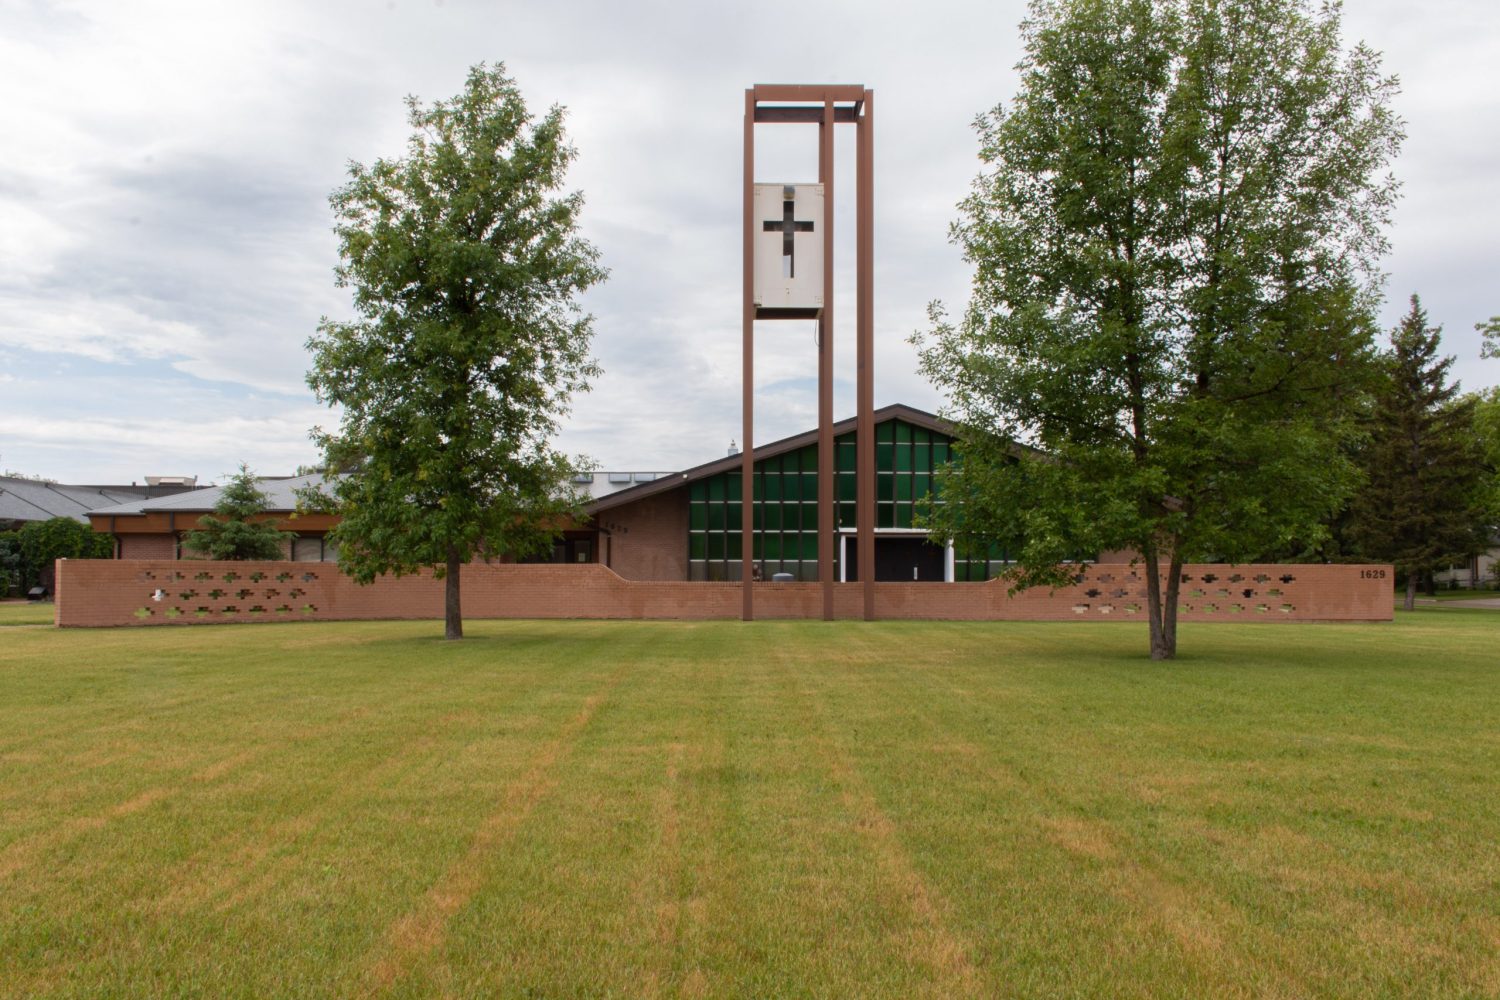 Image shows the exterior of St. Vital Church. A long and brown brick fence spans across the lot, punctuated with cross shaped indentations on the far left and right sides. The building has a dramatic and sloping triangular frame with large glass windows. A cross is carved onto a white and rectangular box, which is suspended on brown beams.